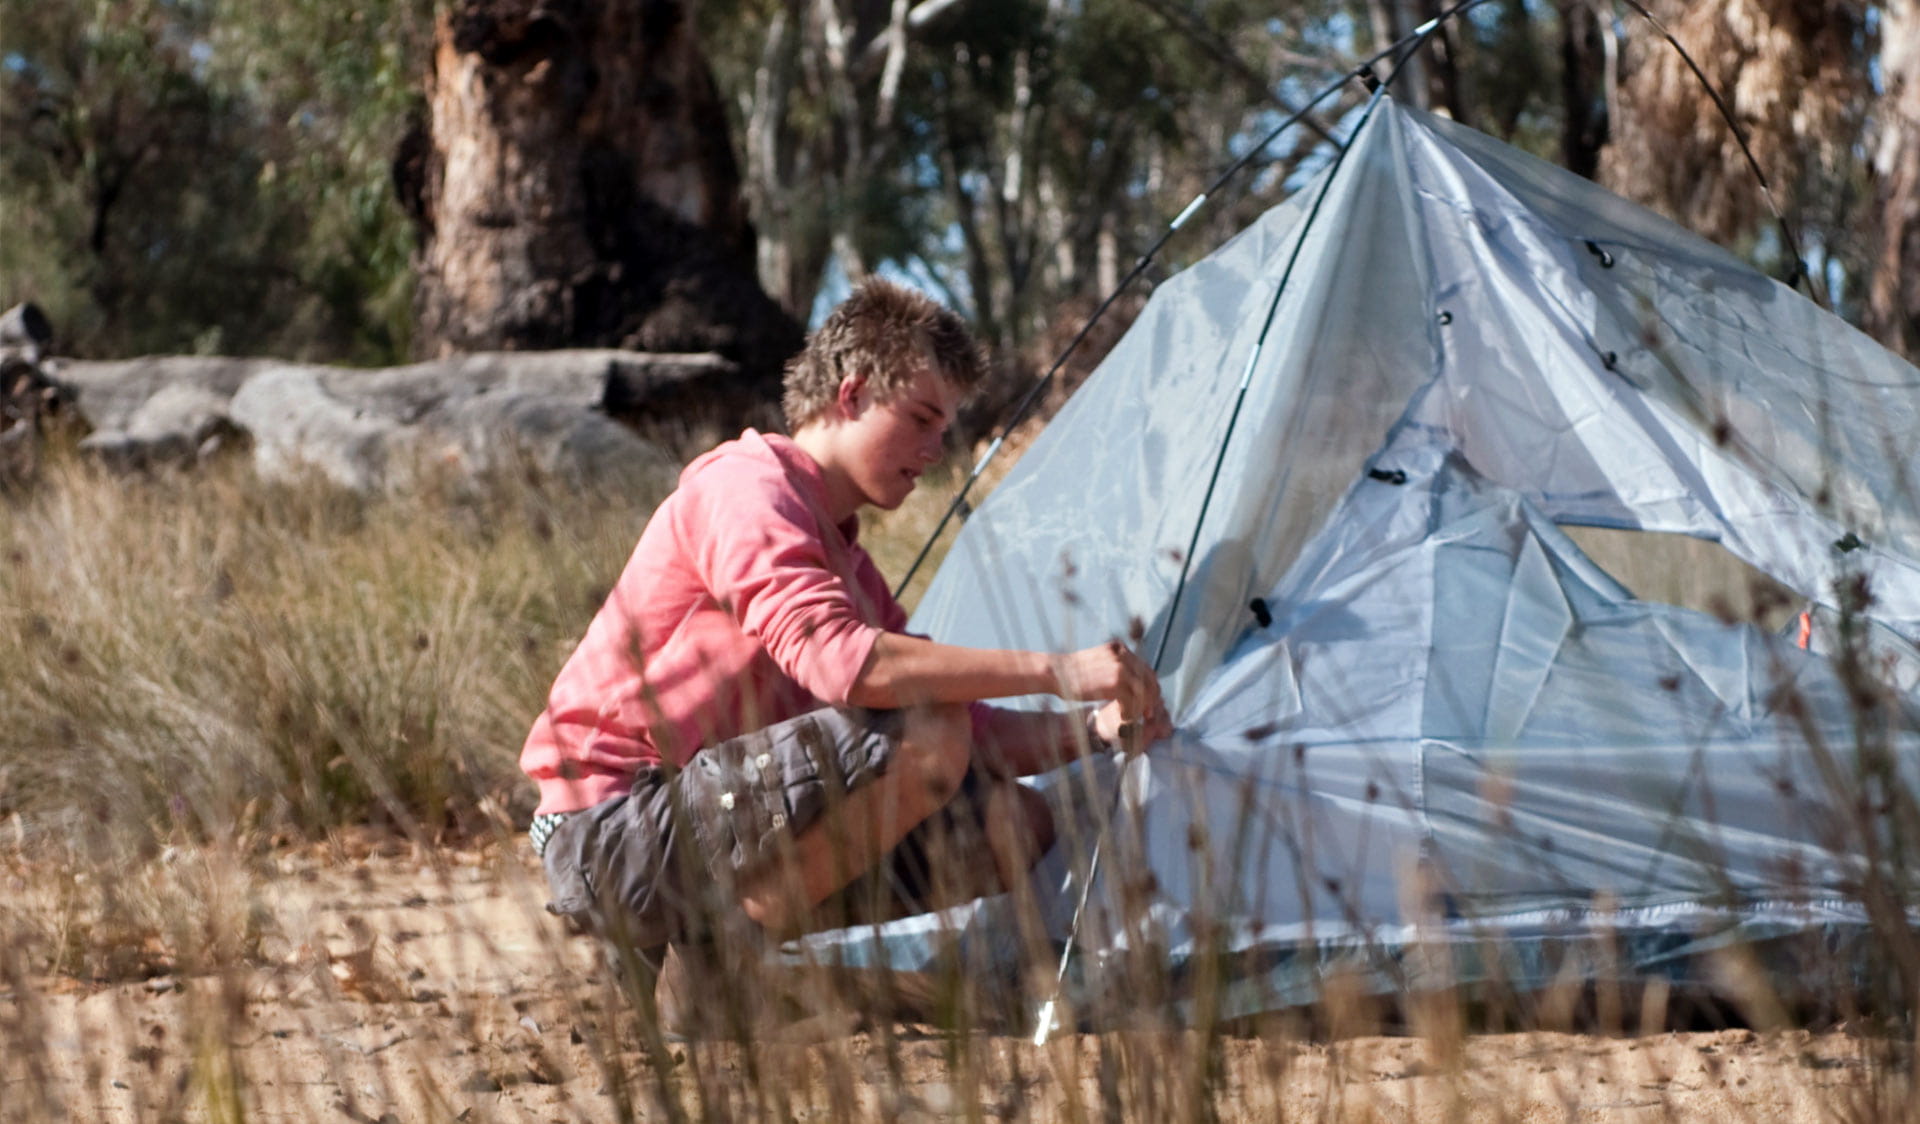 Setting up a tent 